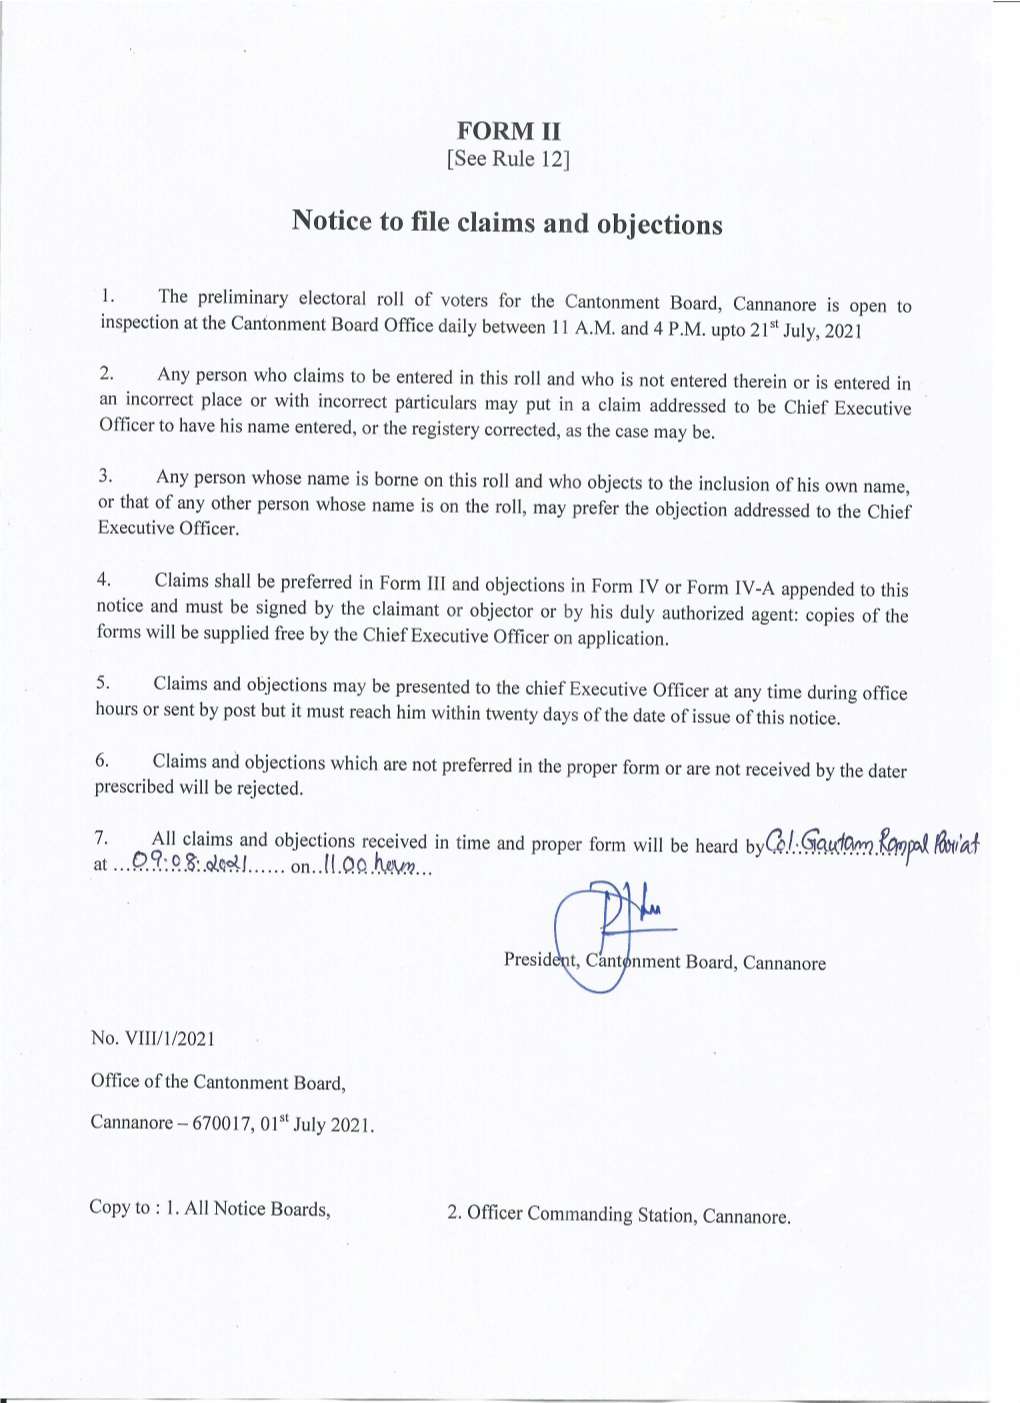 Notice to File Claims and Objections – the Preliminary Electoral Roll Of